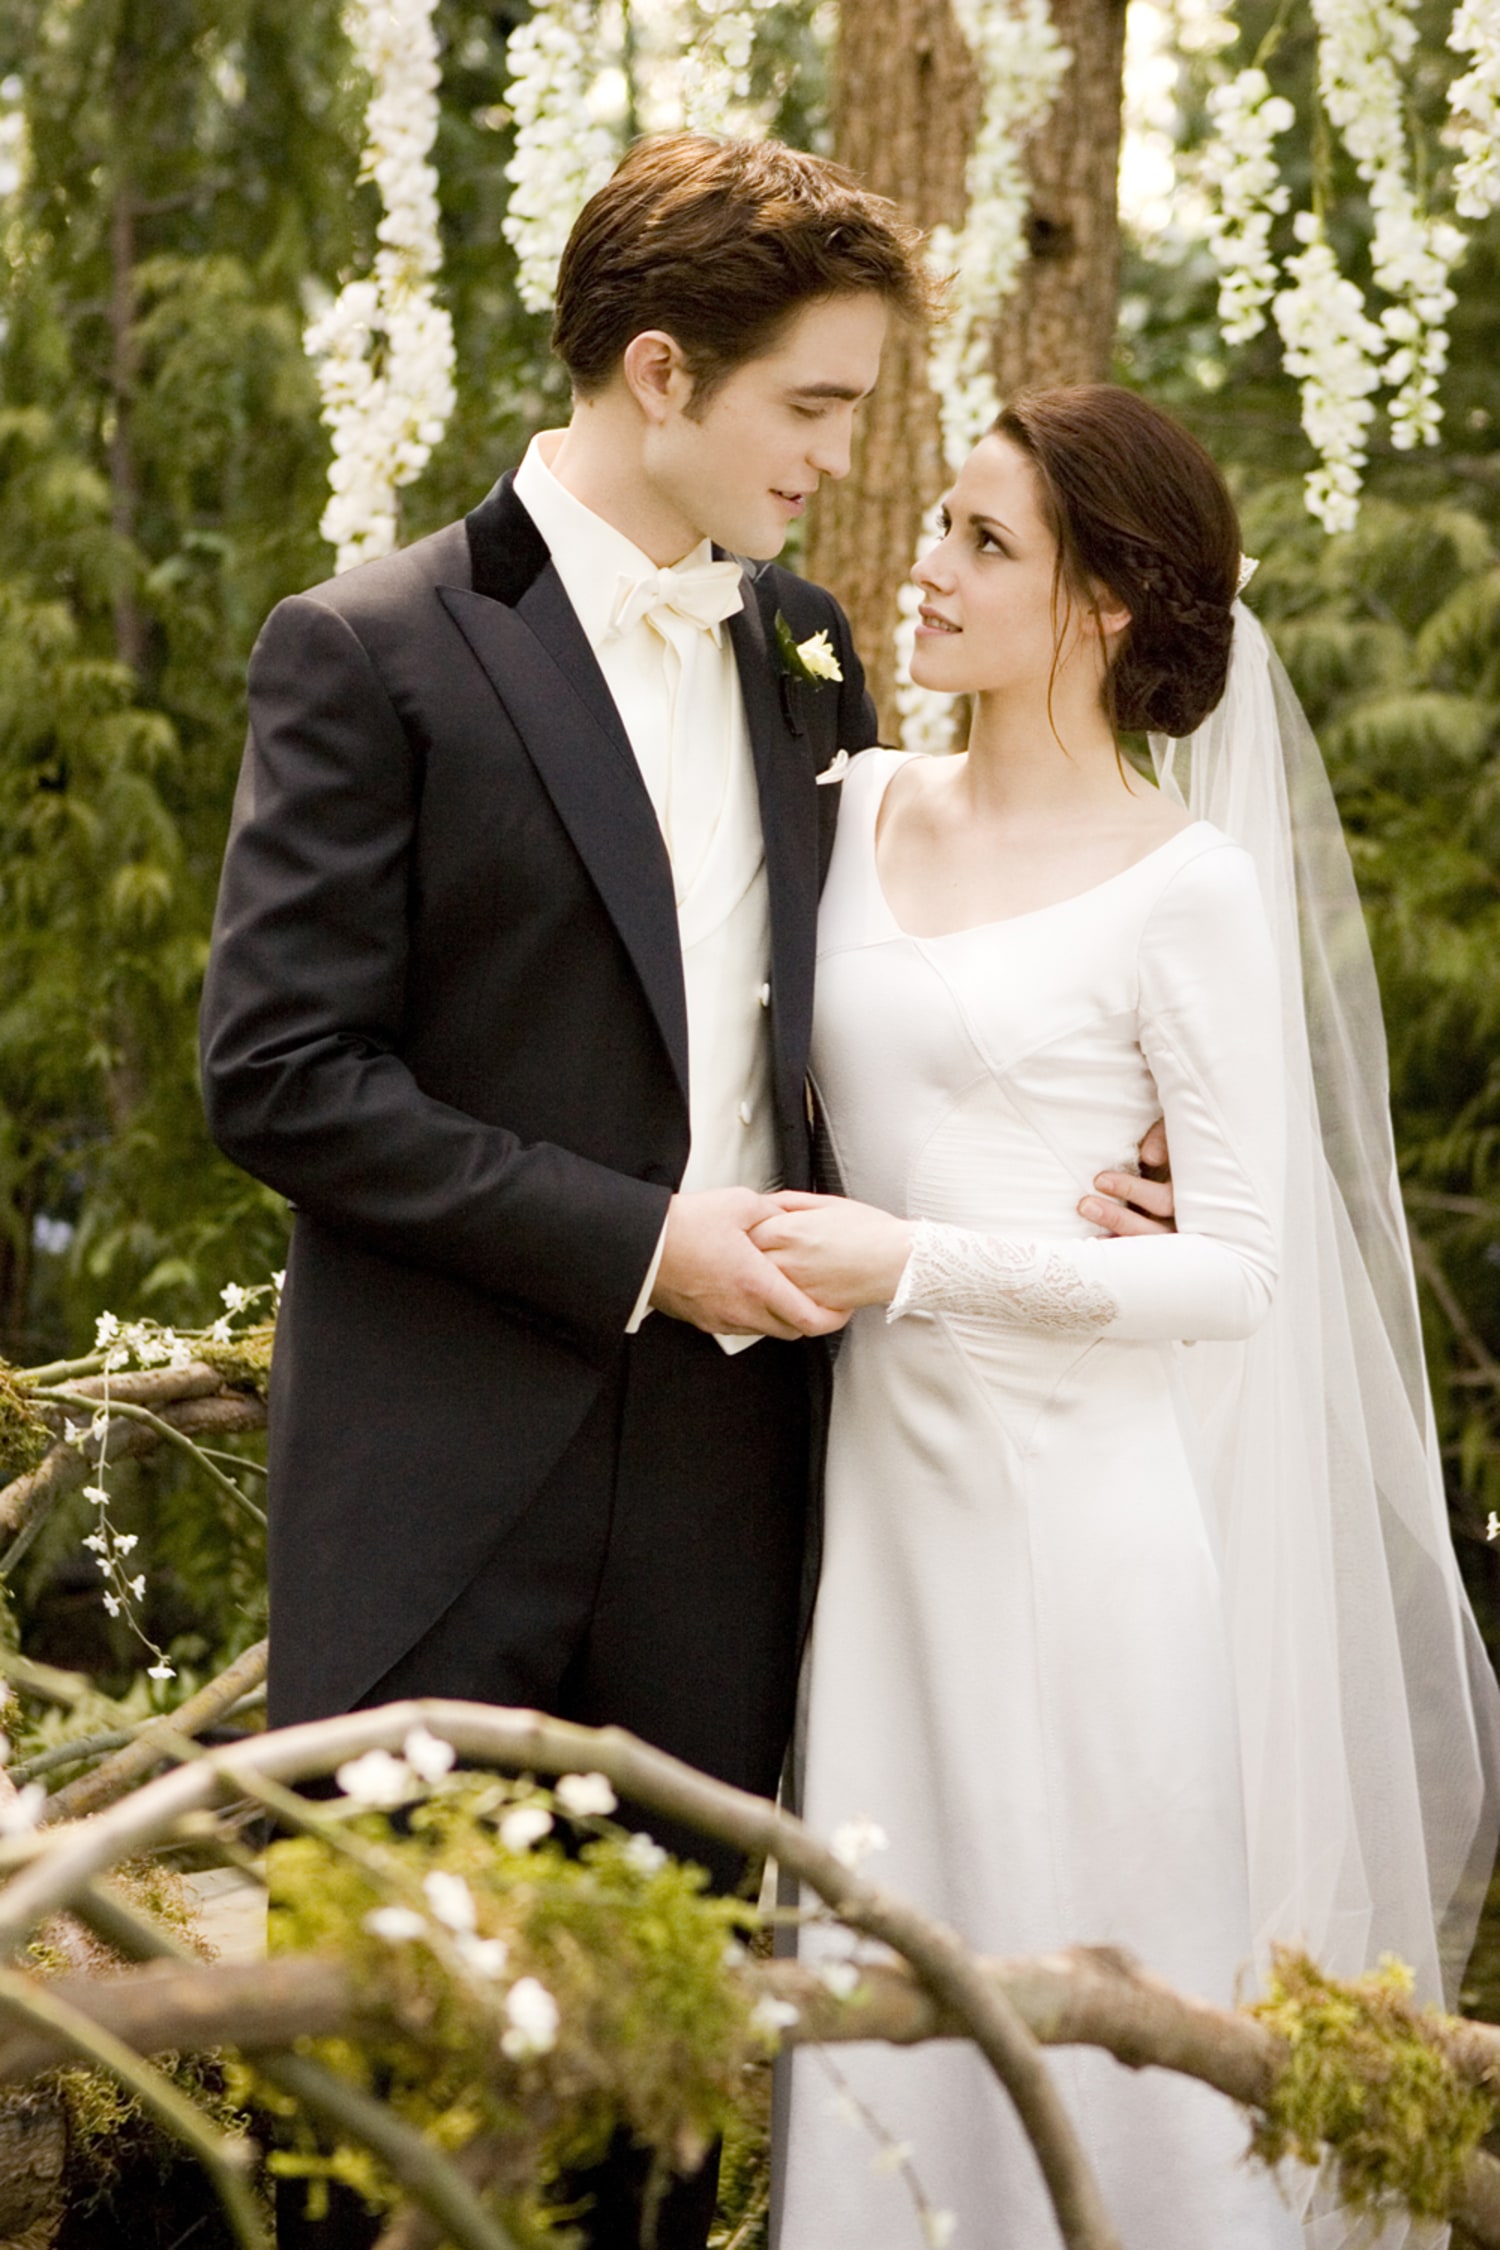 Bella Swan's Twilight Wedding Dress Is Up For Auction | Marie Claire UK